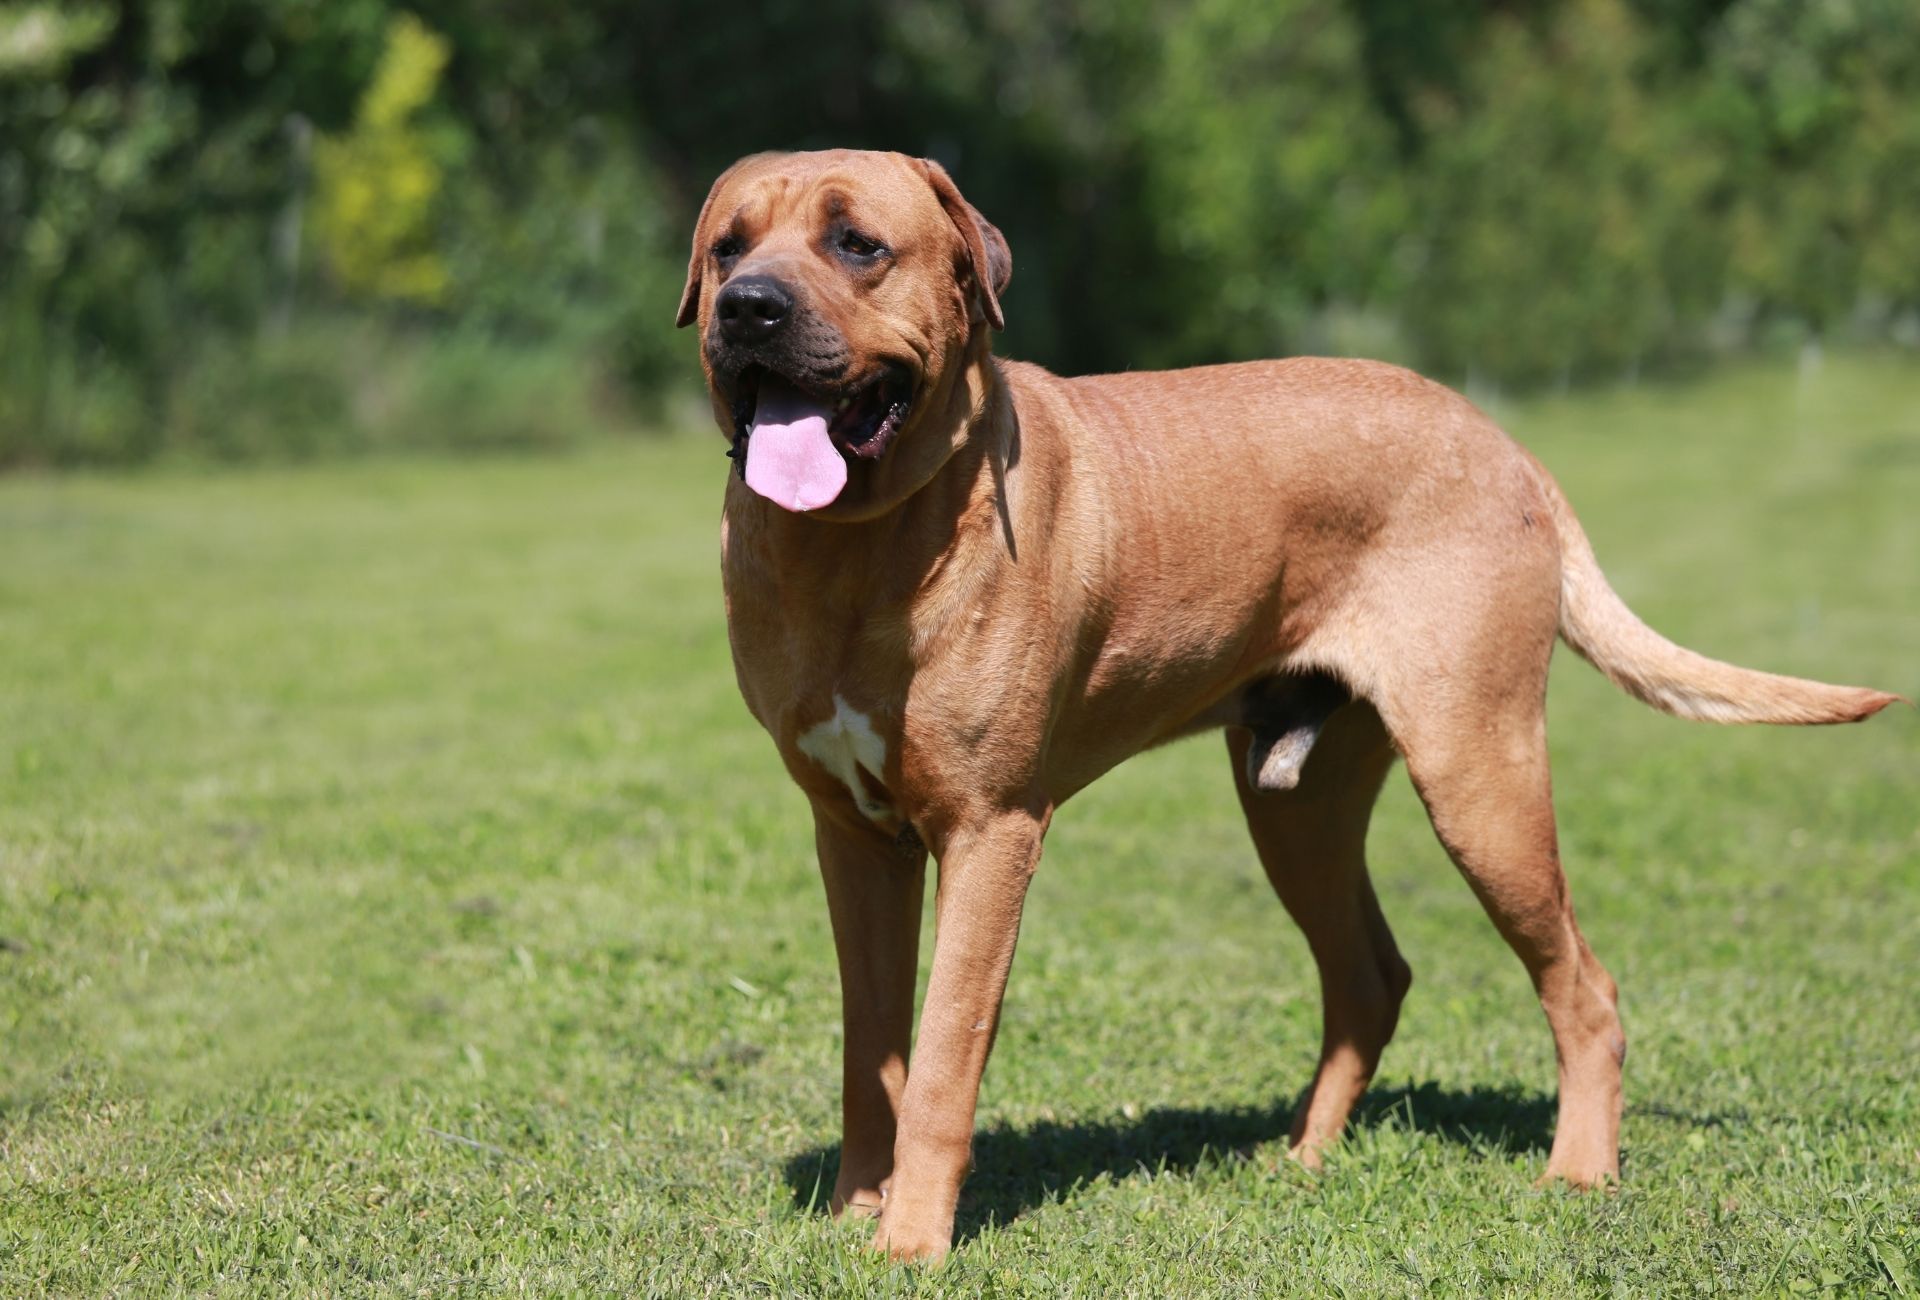 Large male Japanese Mastiff also called Tosa Inu standing on grass.